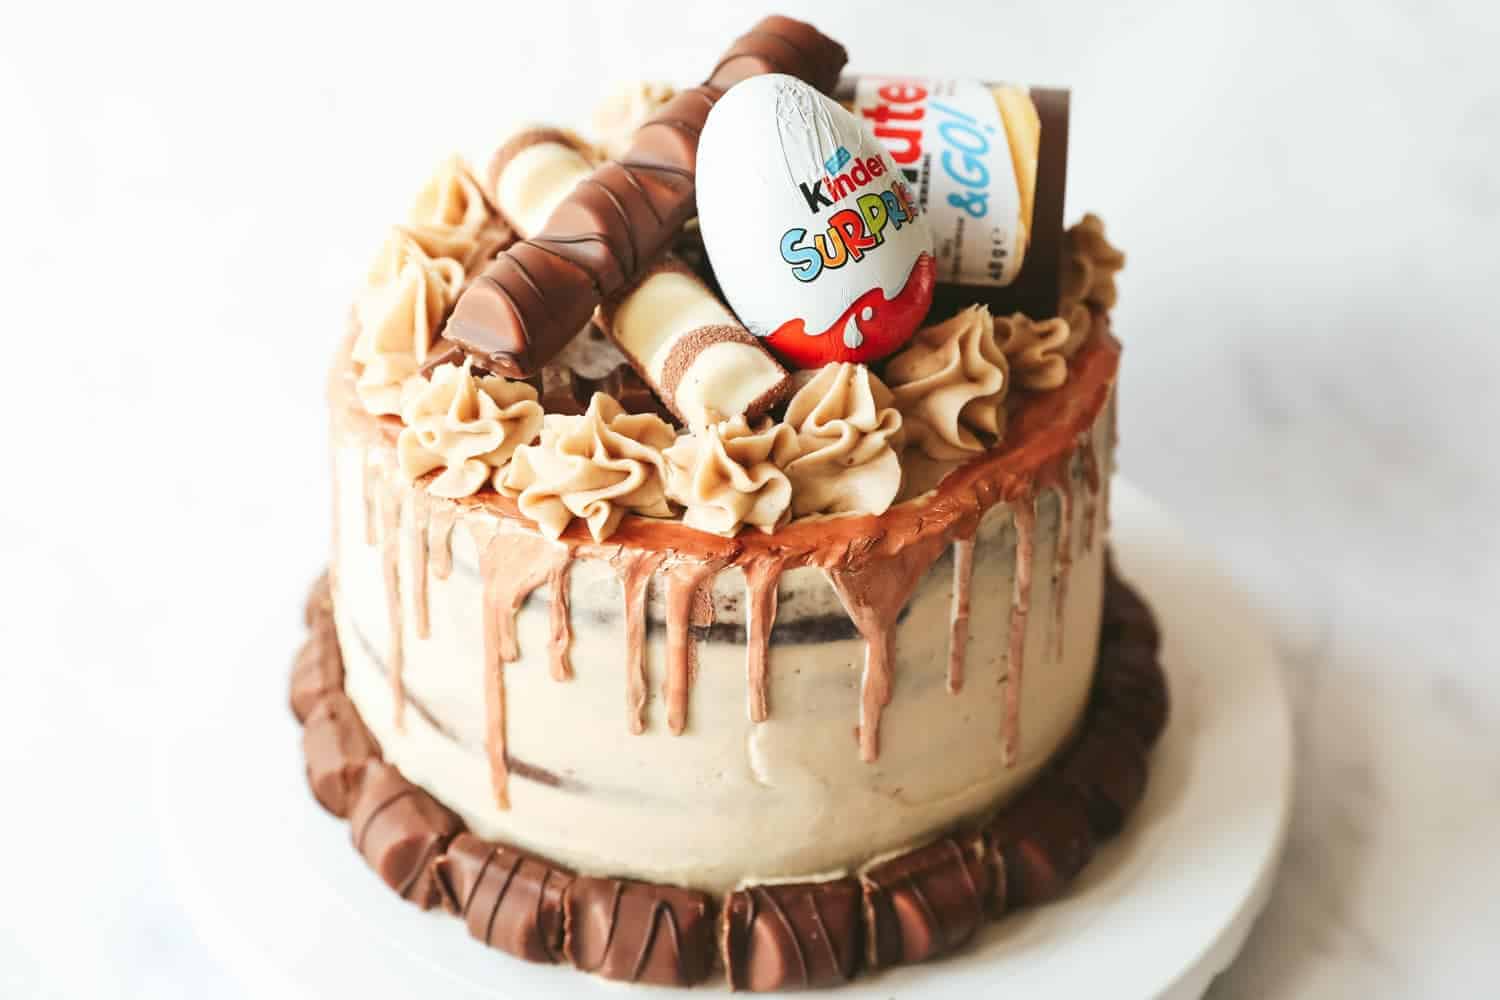 A chocolate layer cake covered with nutella buttercream and decorated with Kinder chocolate